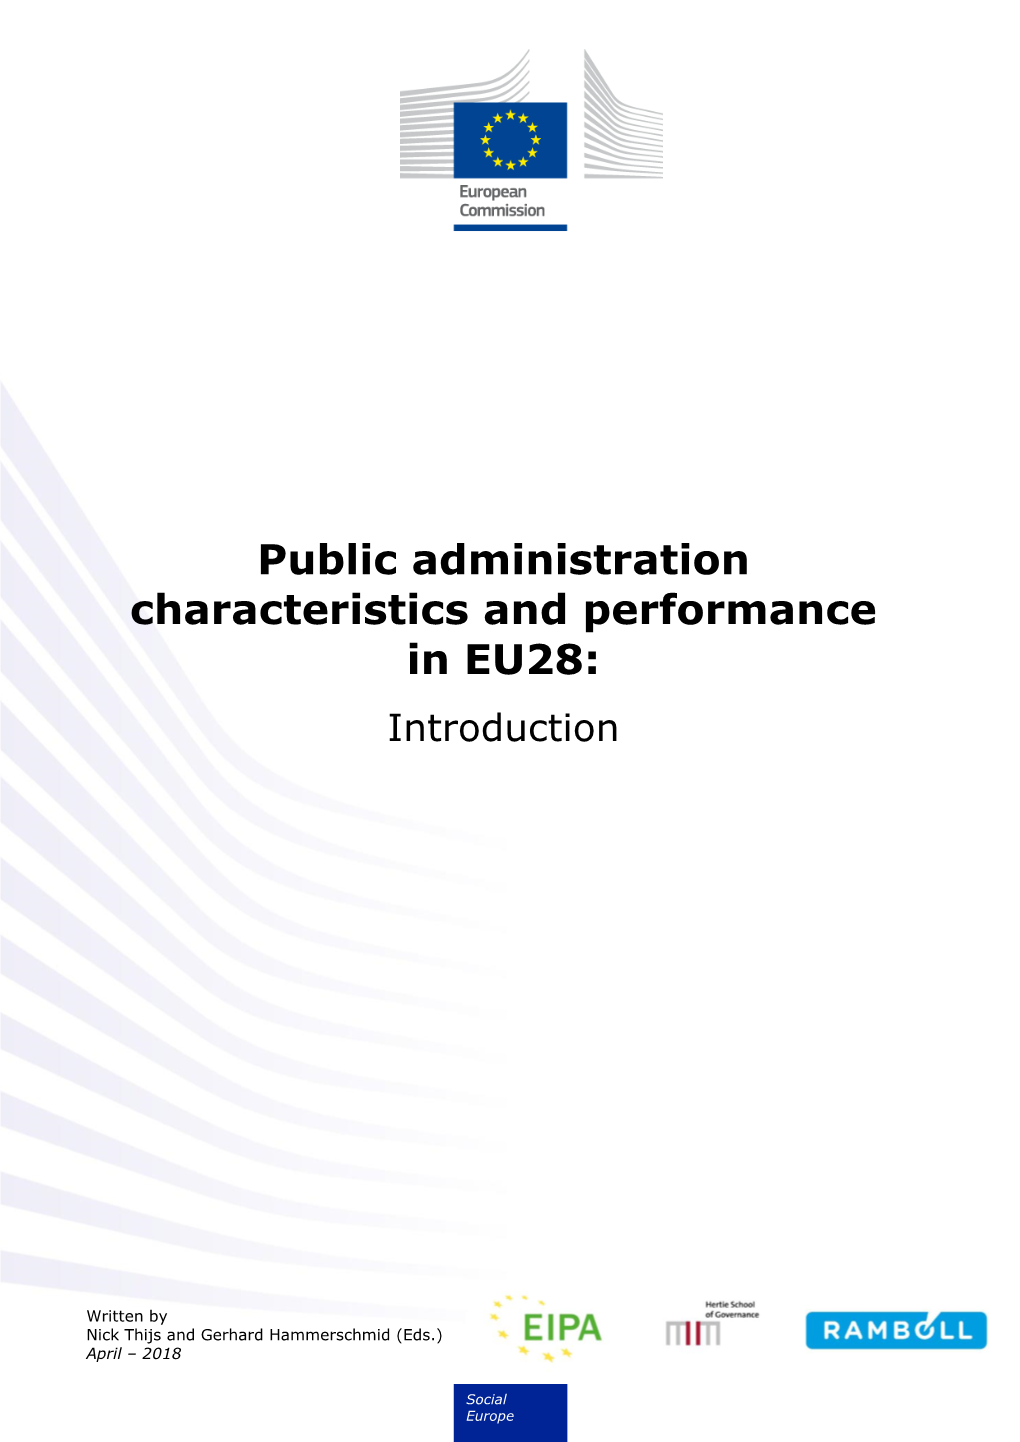 Public Administration Characteristics and Performance in EU28: Introduction